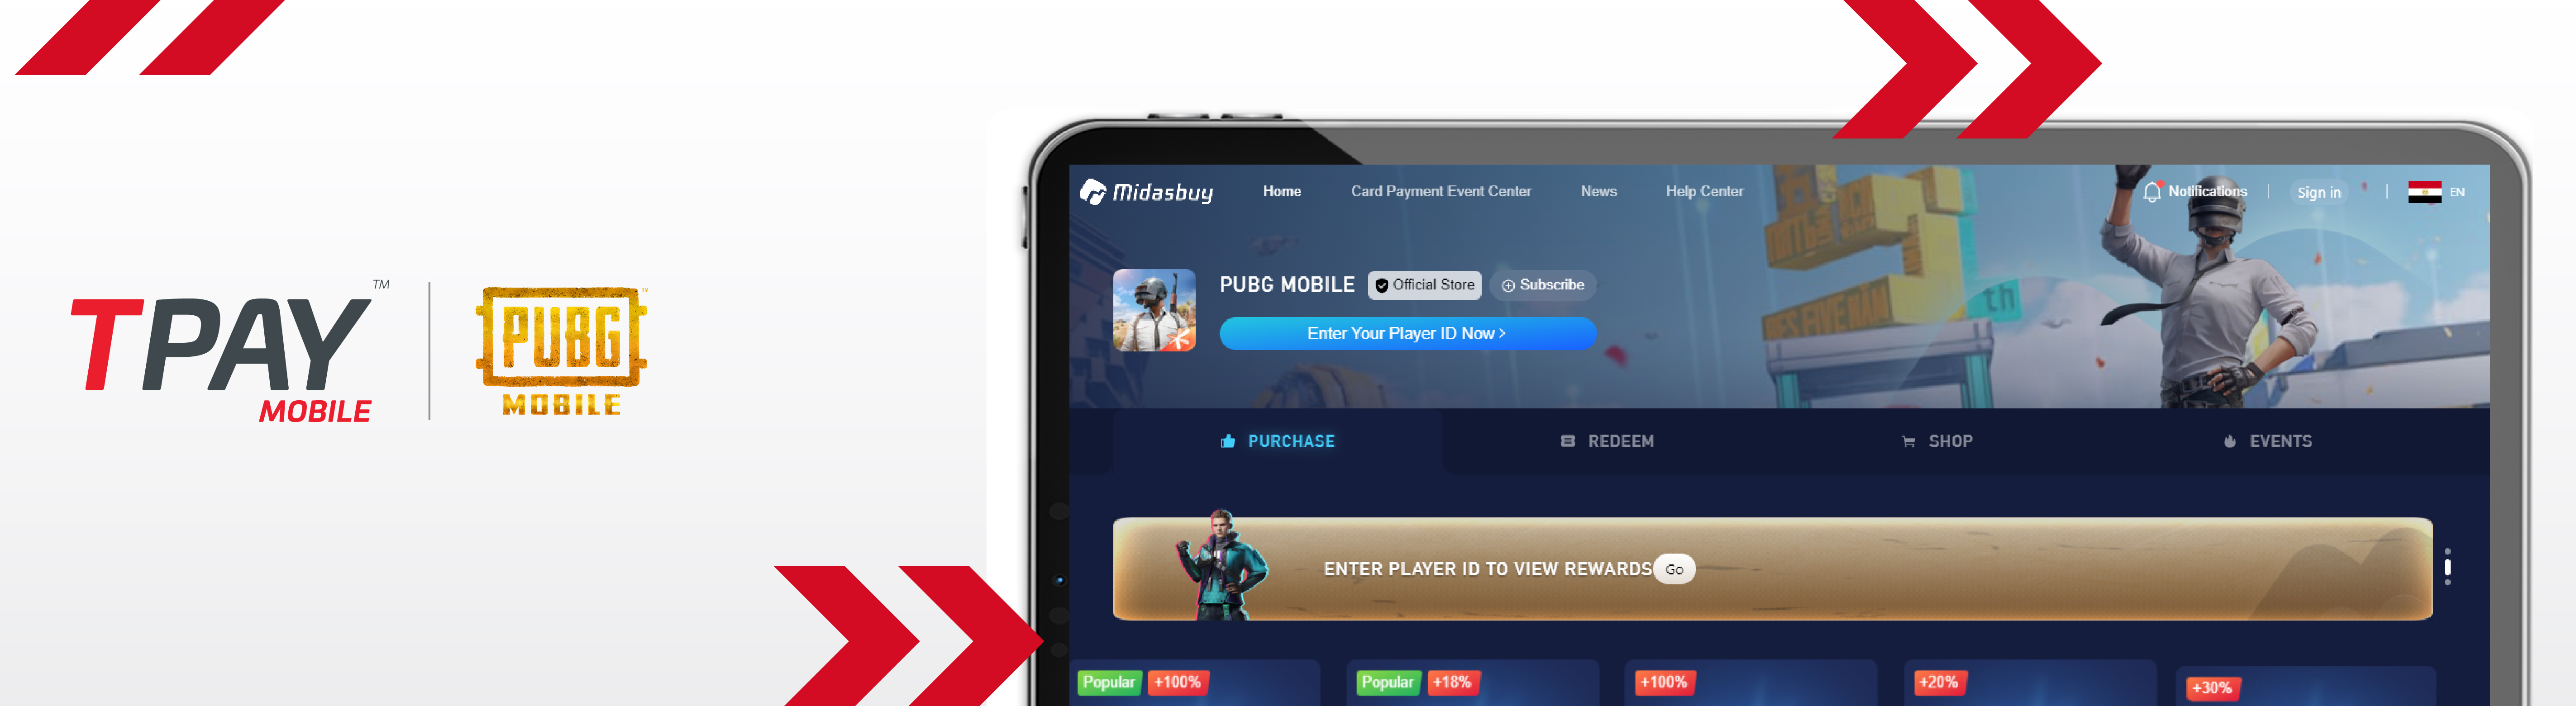 TPAY to enable Mobile Payments for PUBG MOBILE in Egypt! thumbnail